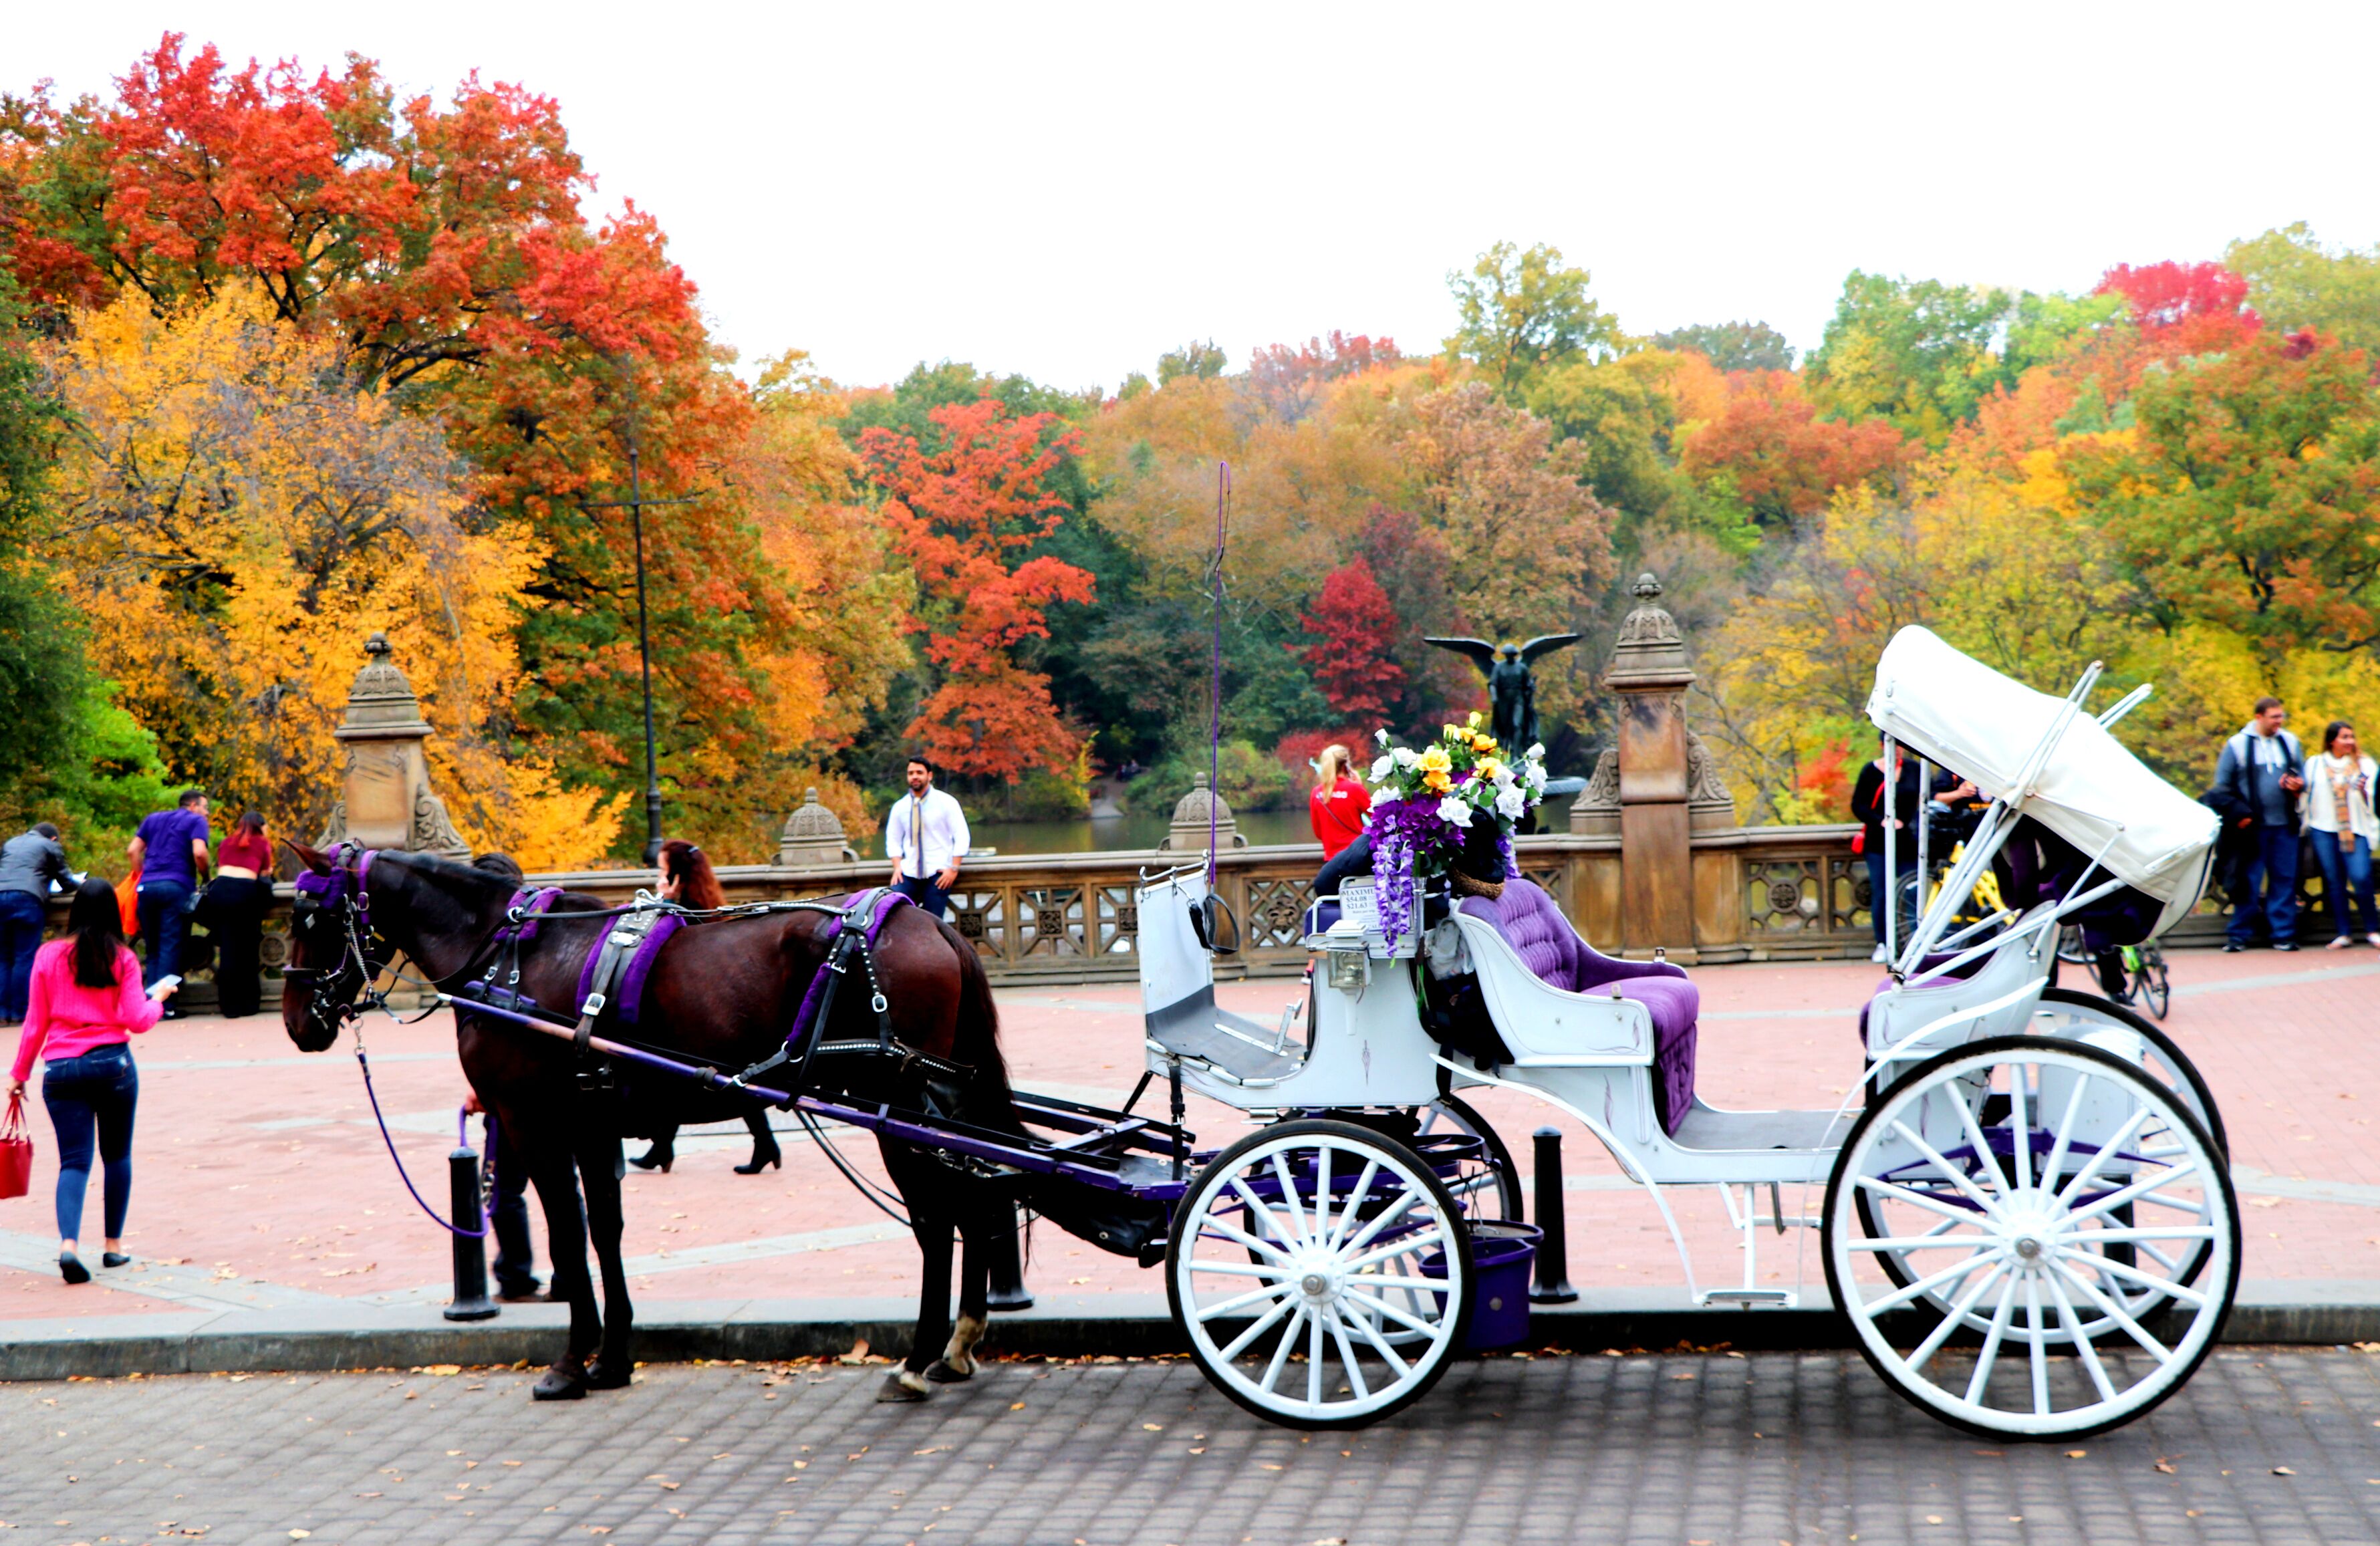 With this ride, you pass by many historical landmarks of the Central Park b...